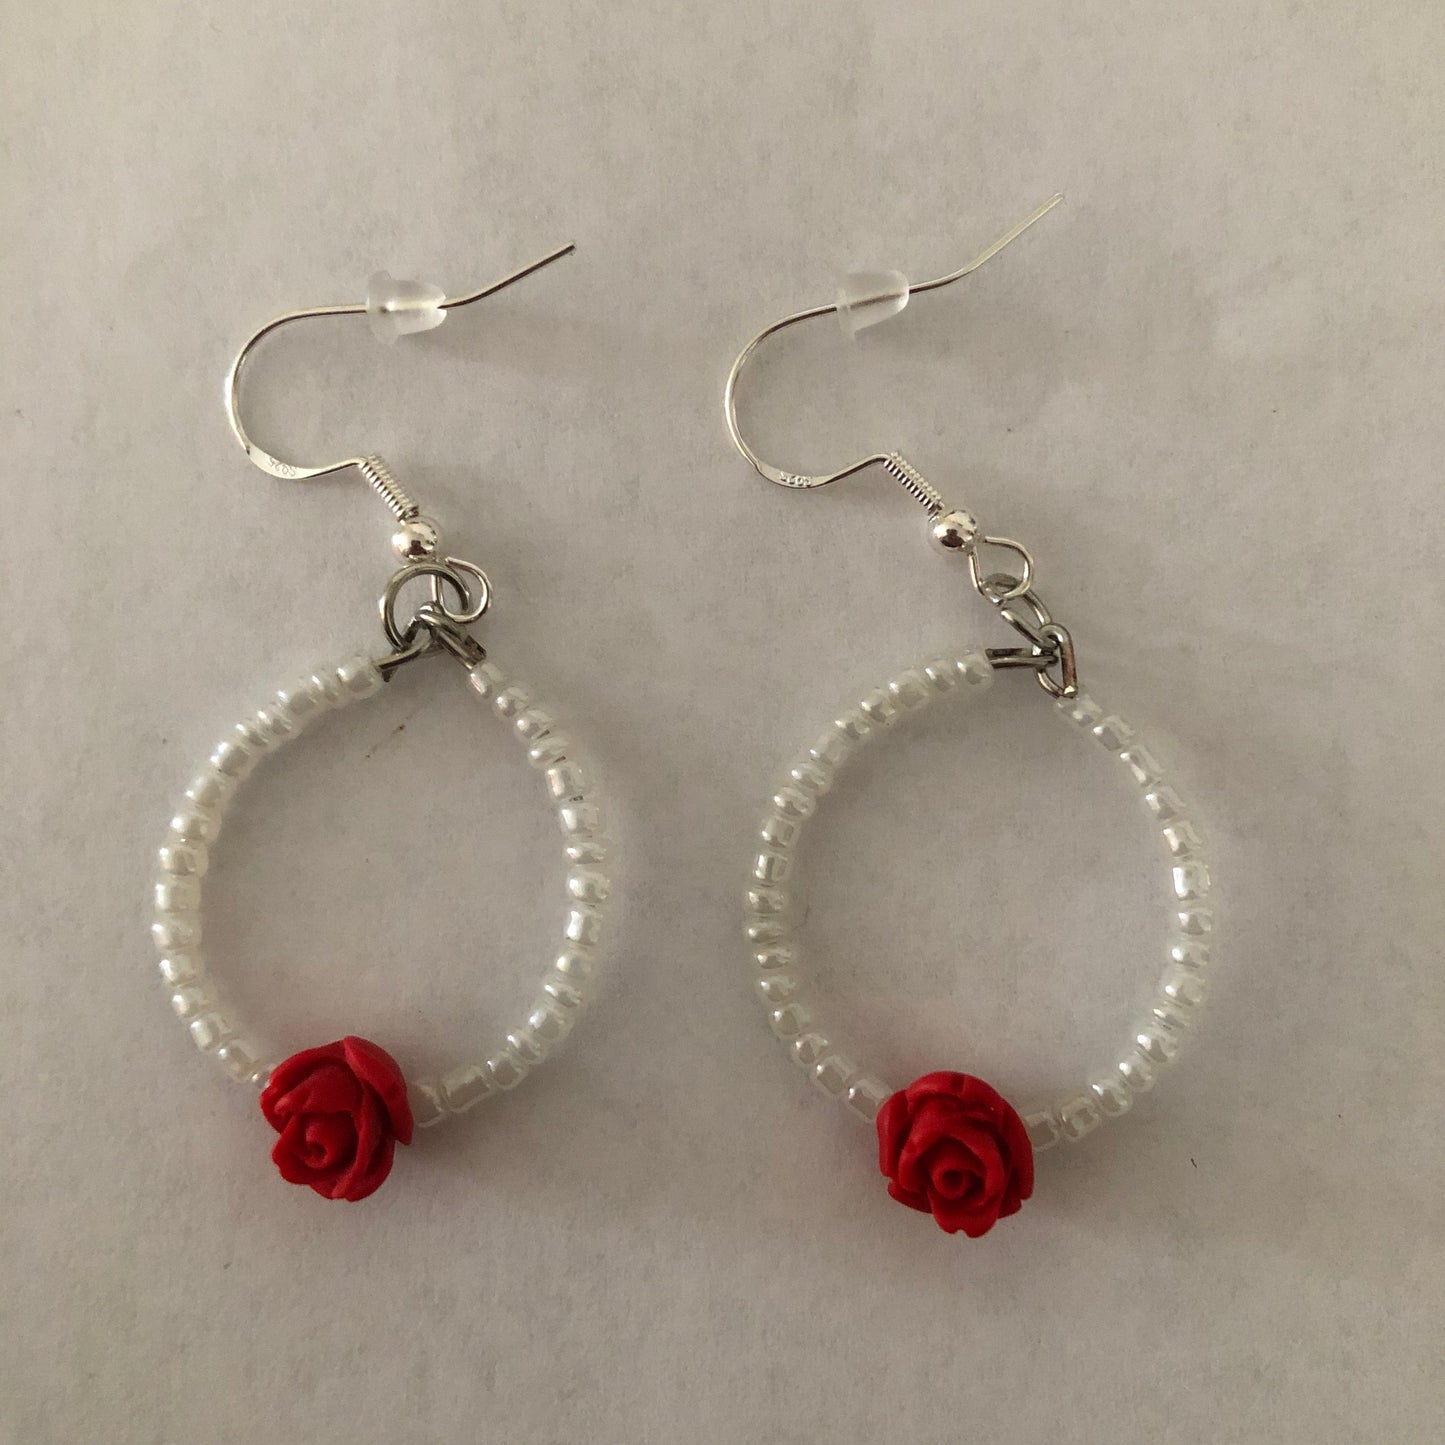 Valentine’s Day hoop earrings with a rose